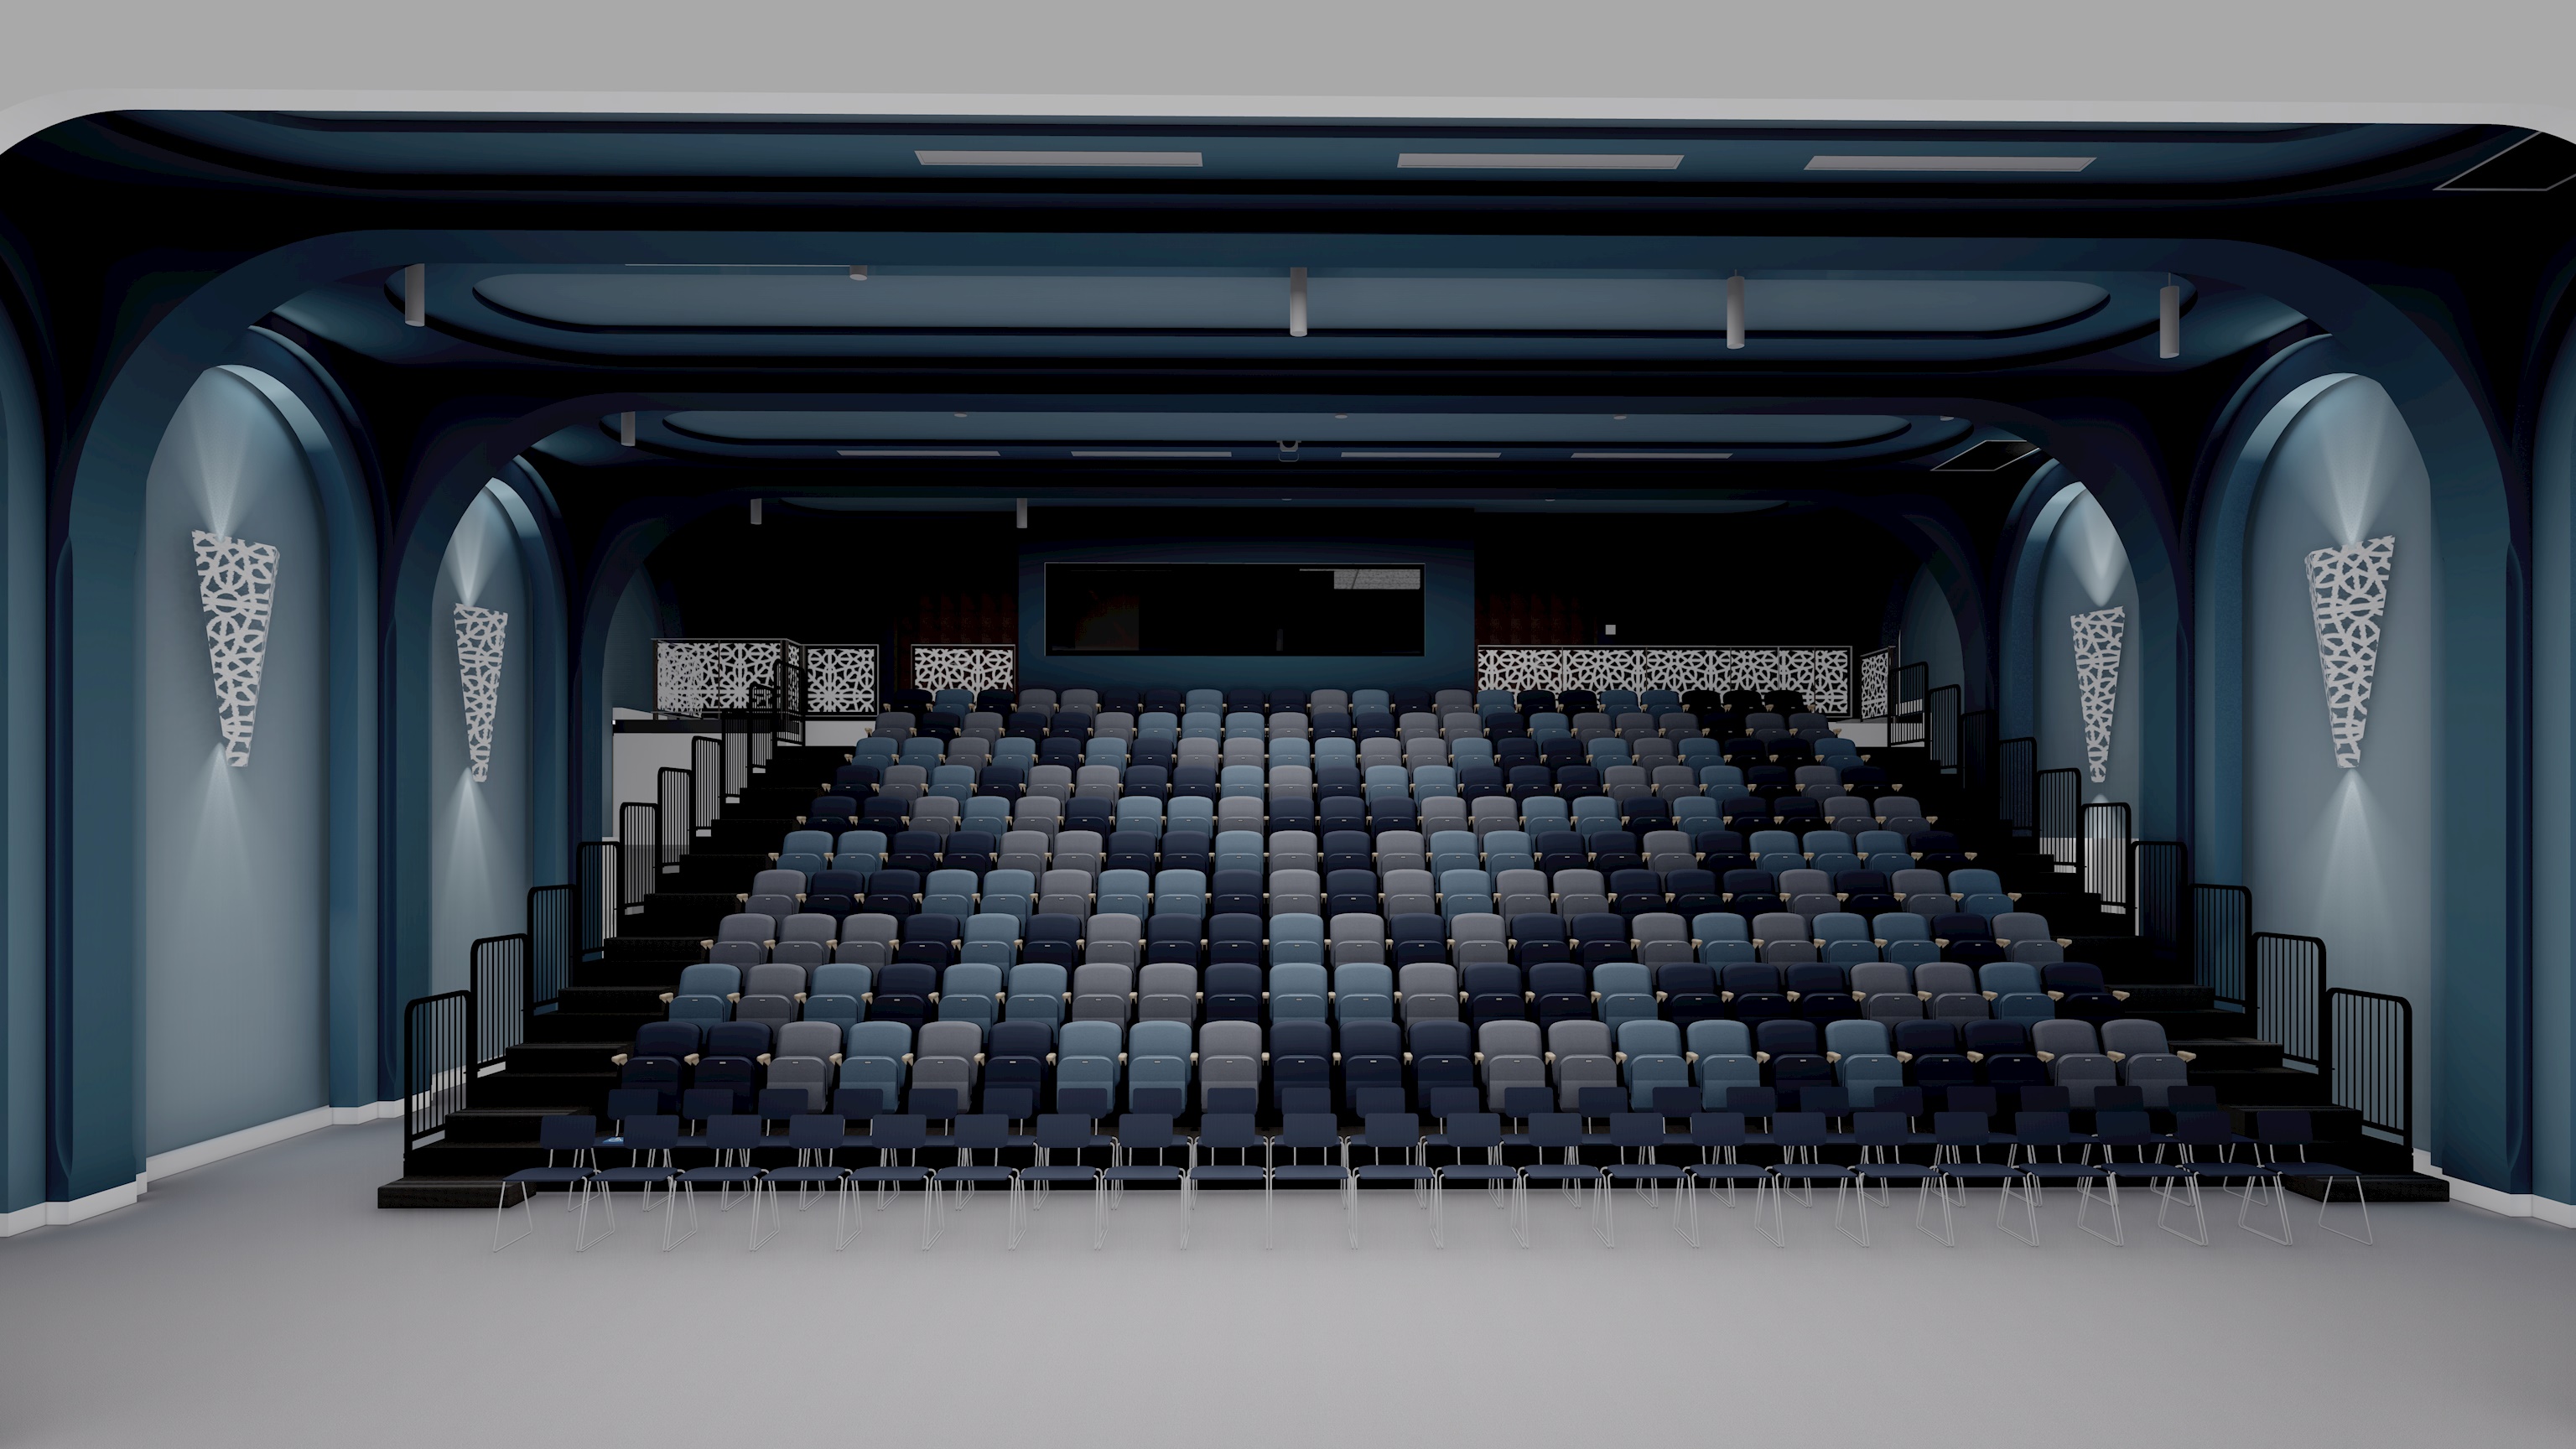 The Theater Stage and Seating Area